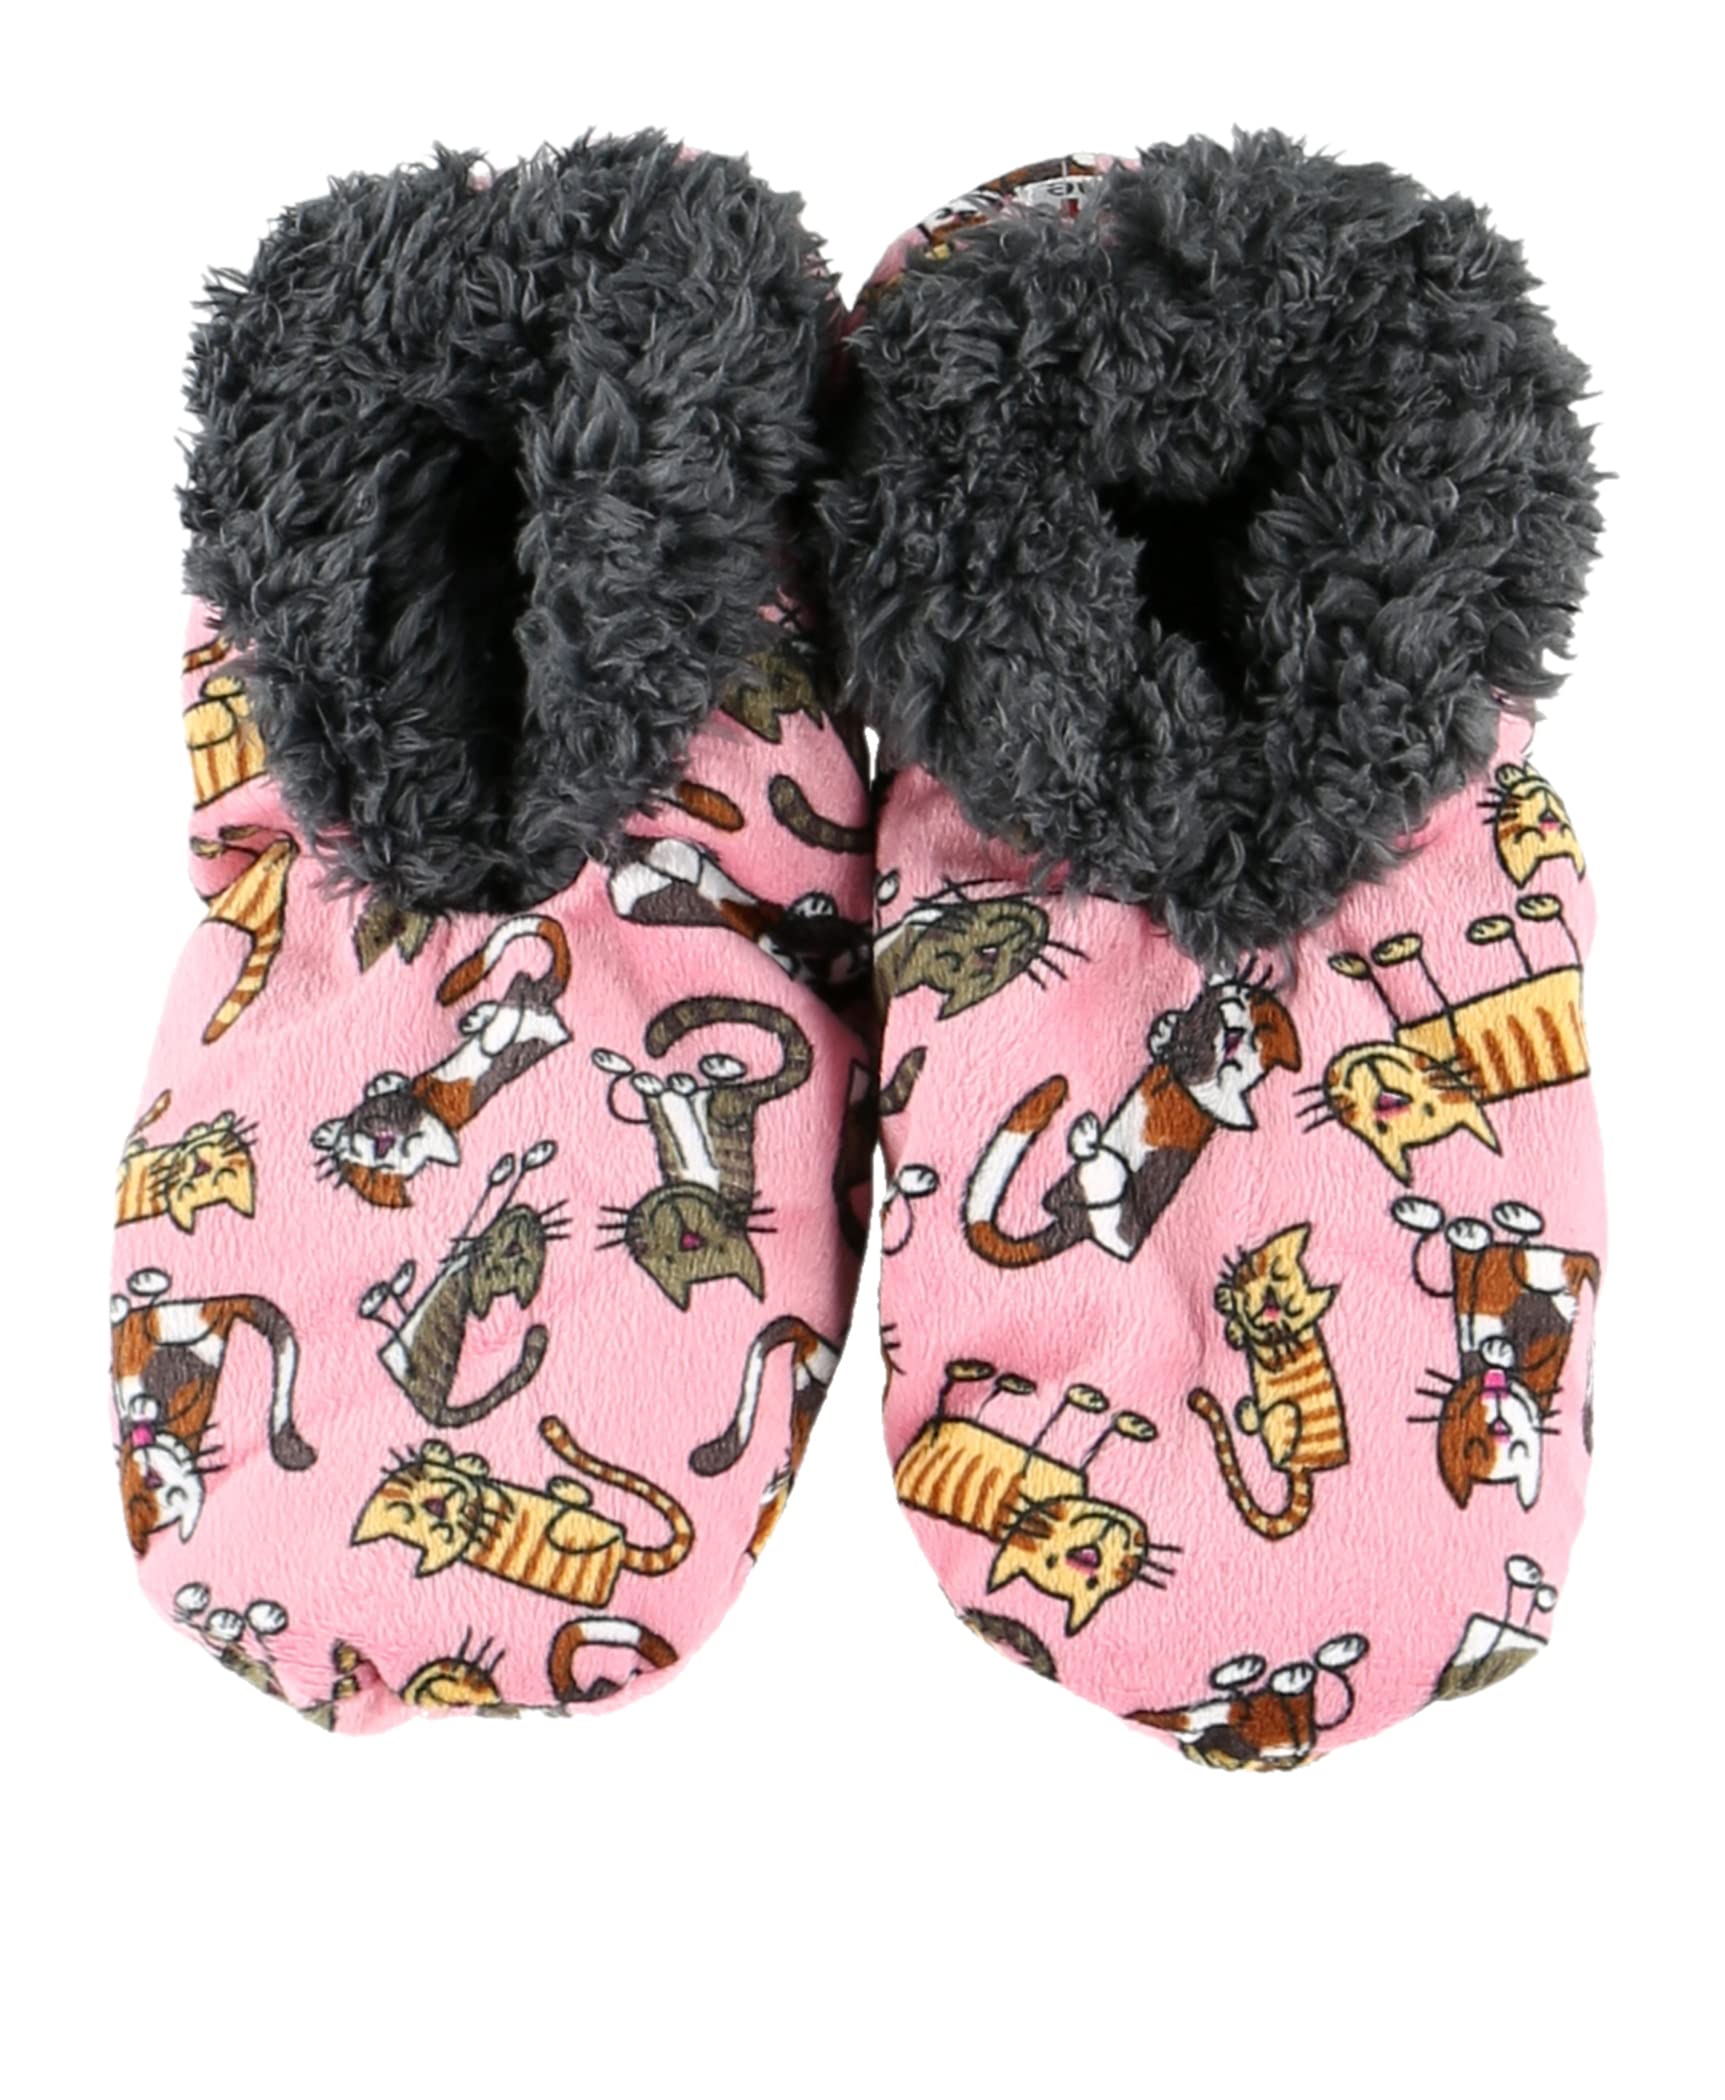 Lazy One Fuzzy Feet Slippers for Women, cute Fleece-Lined House Slippers, cat Nap, Non-Skid